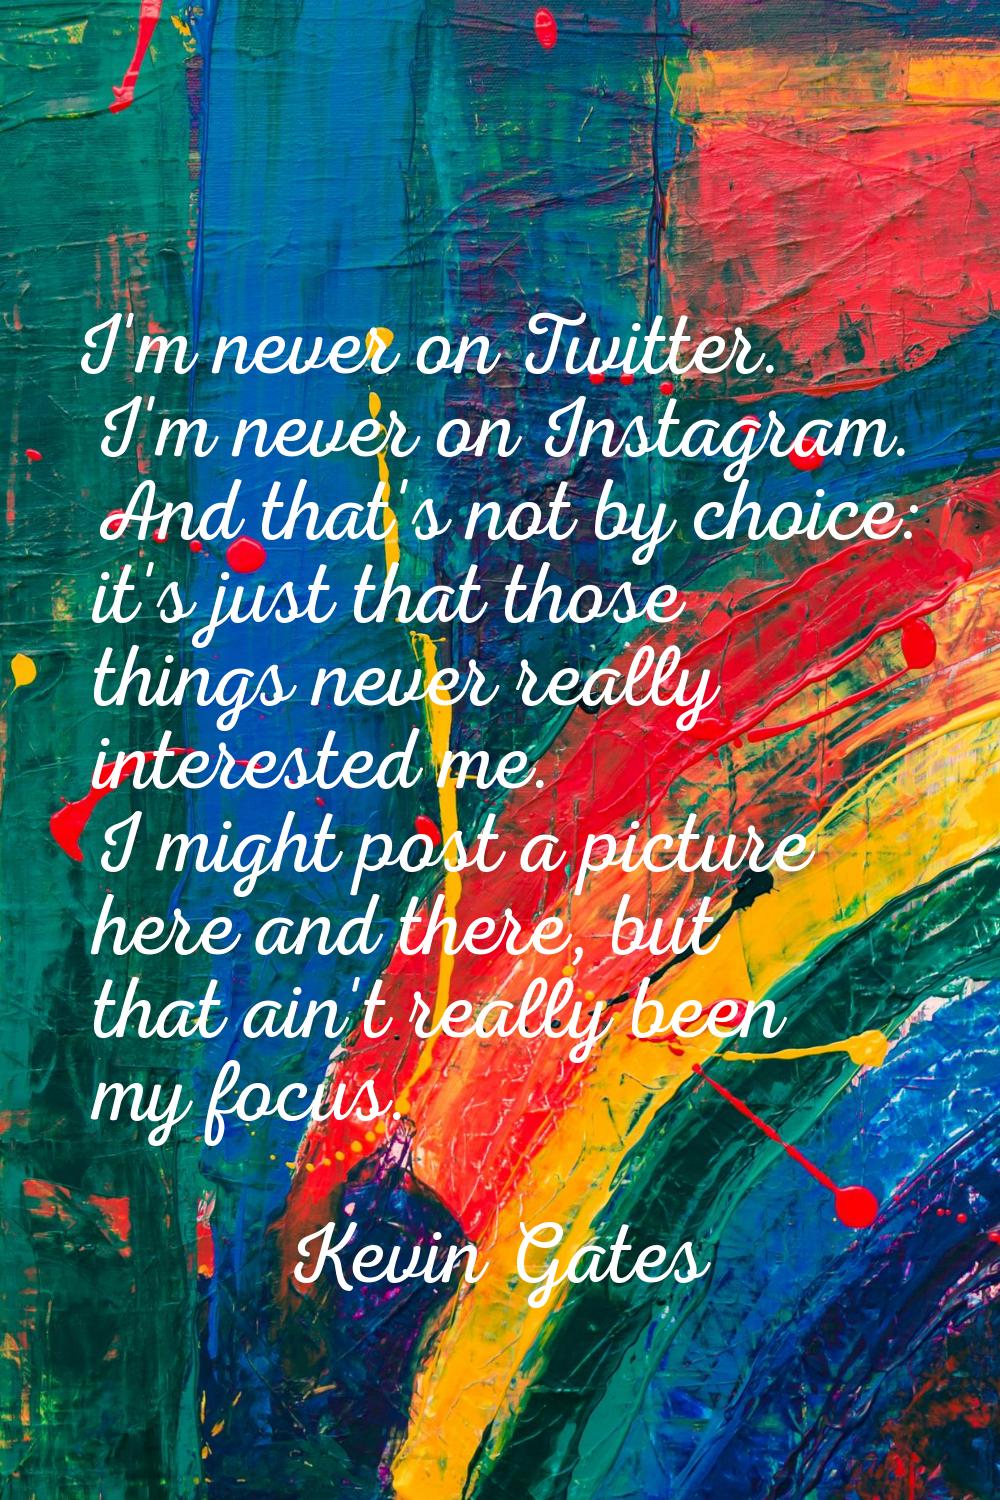 I'm never on Twitter. I'm never on Instagram. And that's not by choice: it's just that those things